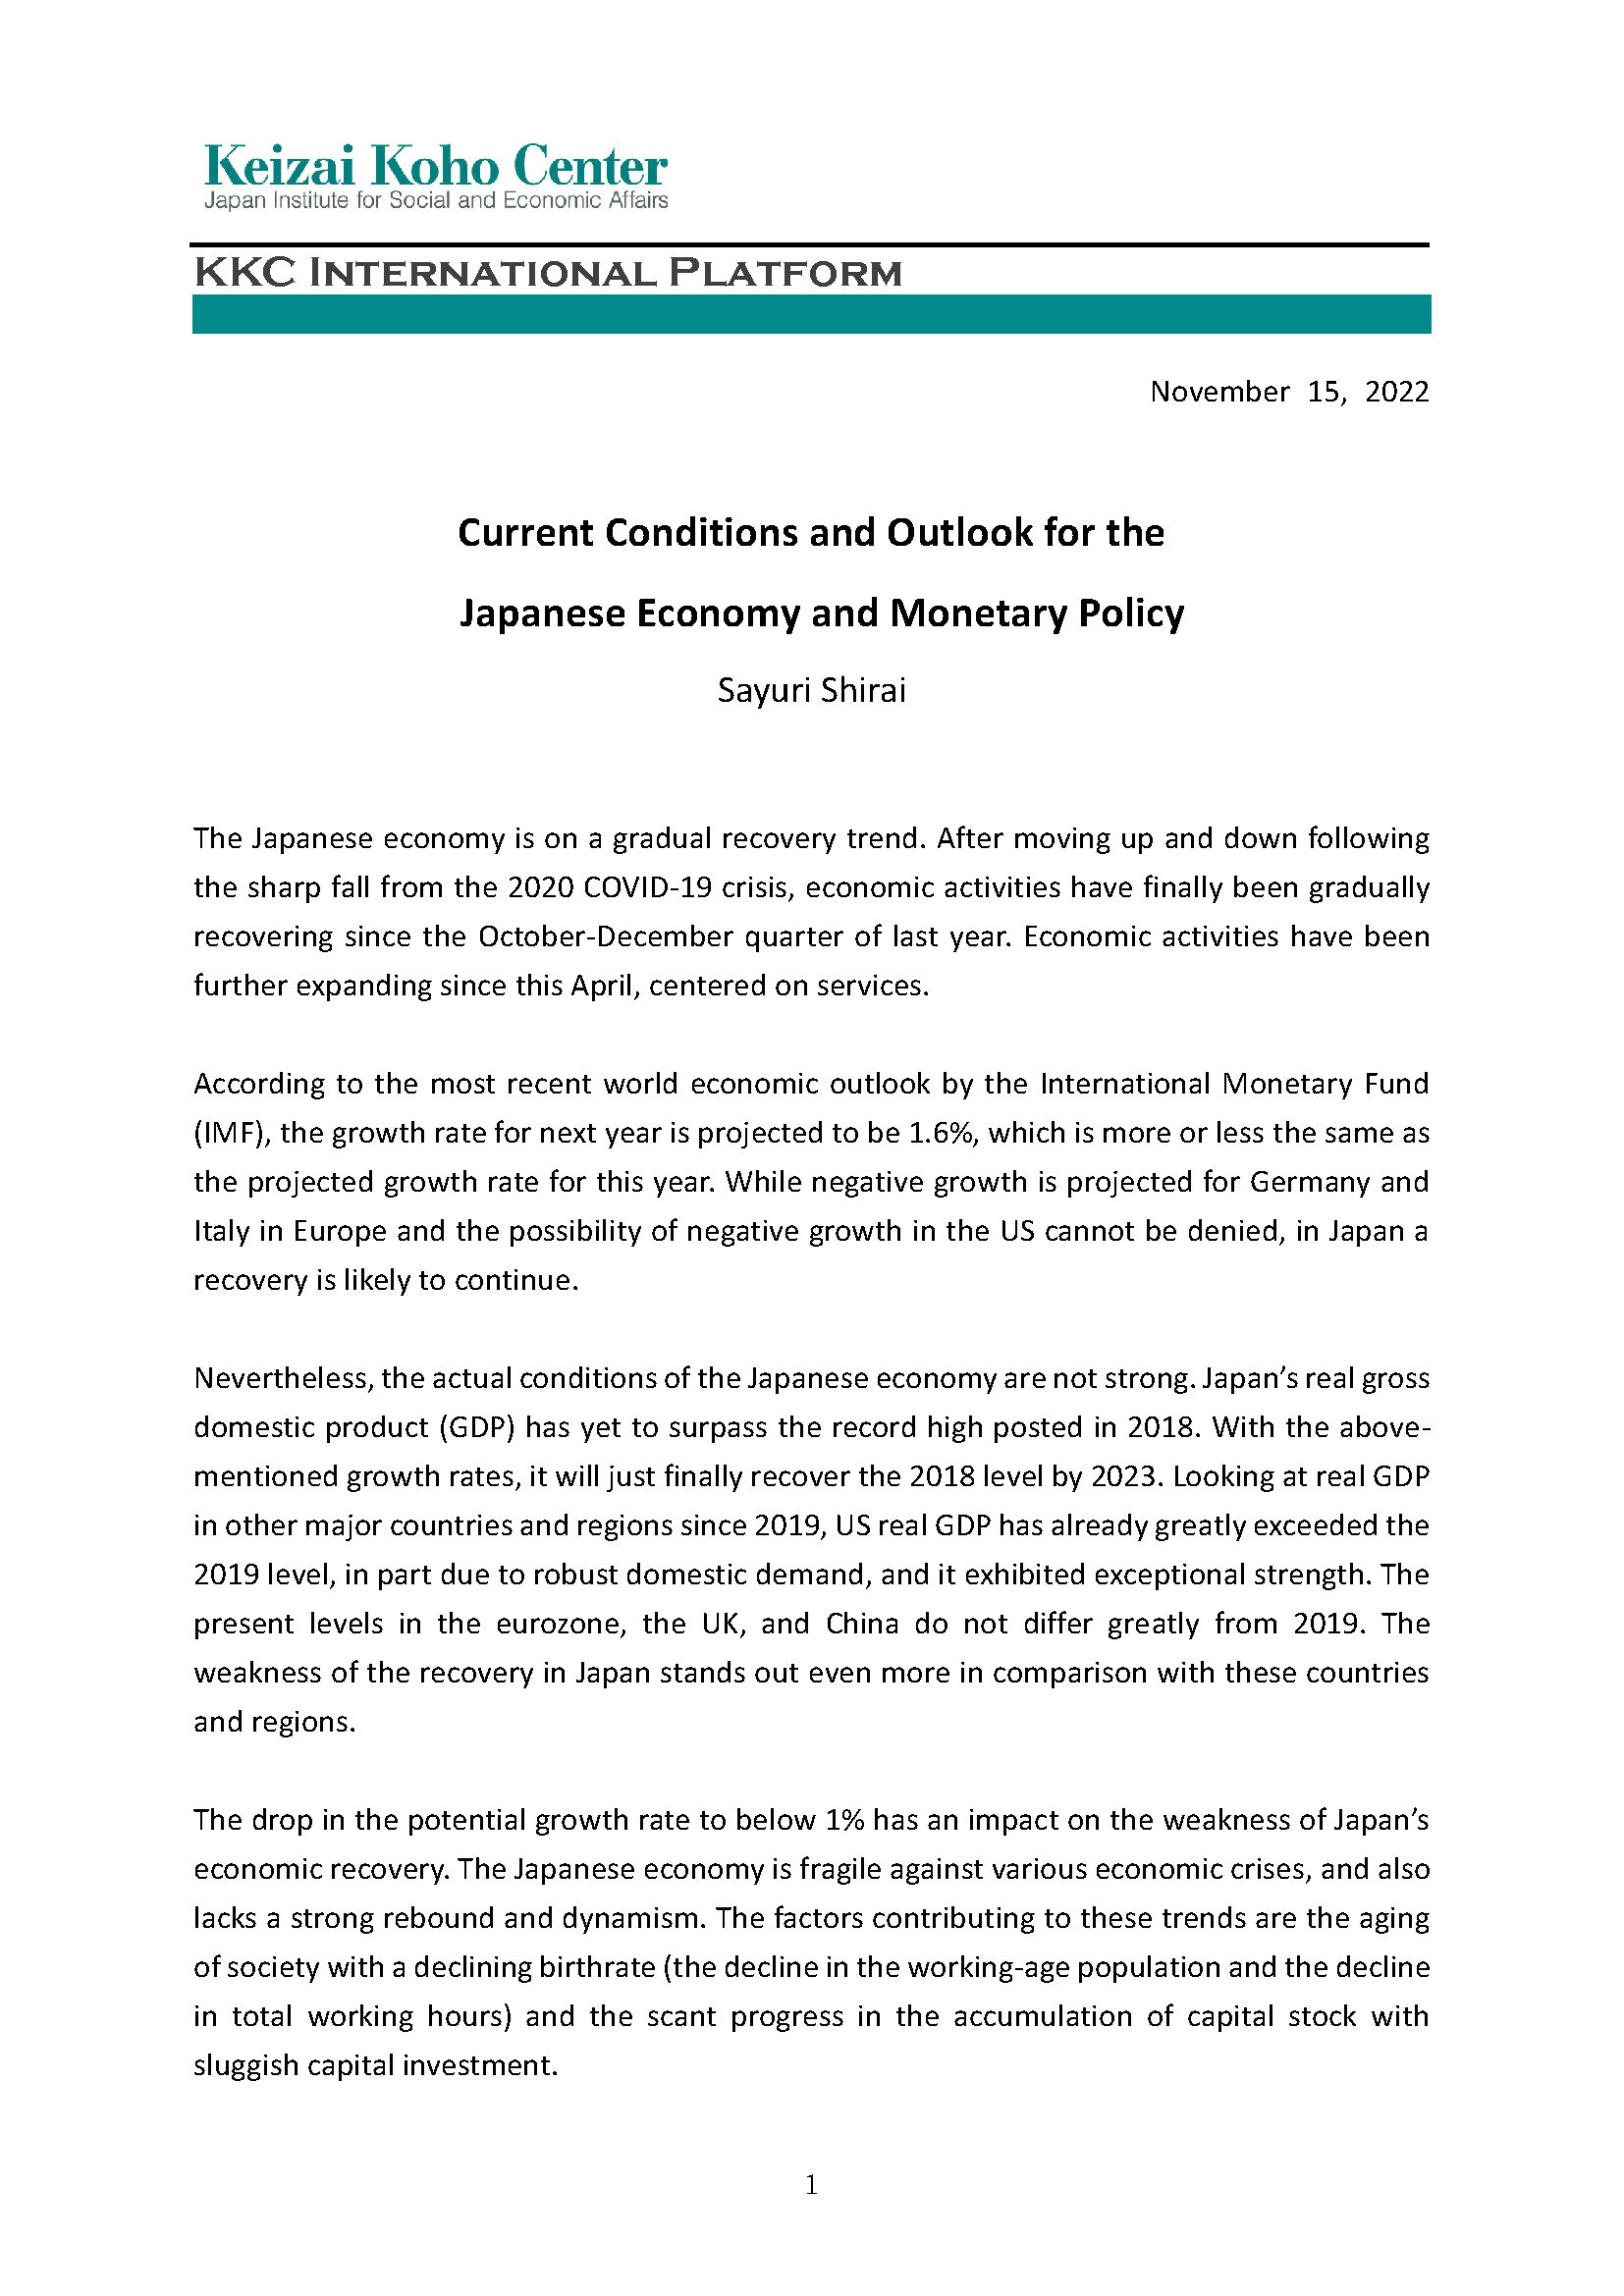 Current Conditions and Outlook for the Japanese Economy and Monetary Policy